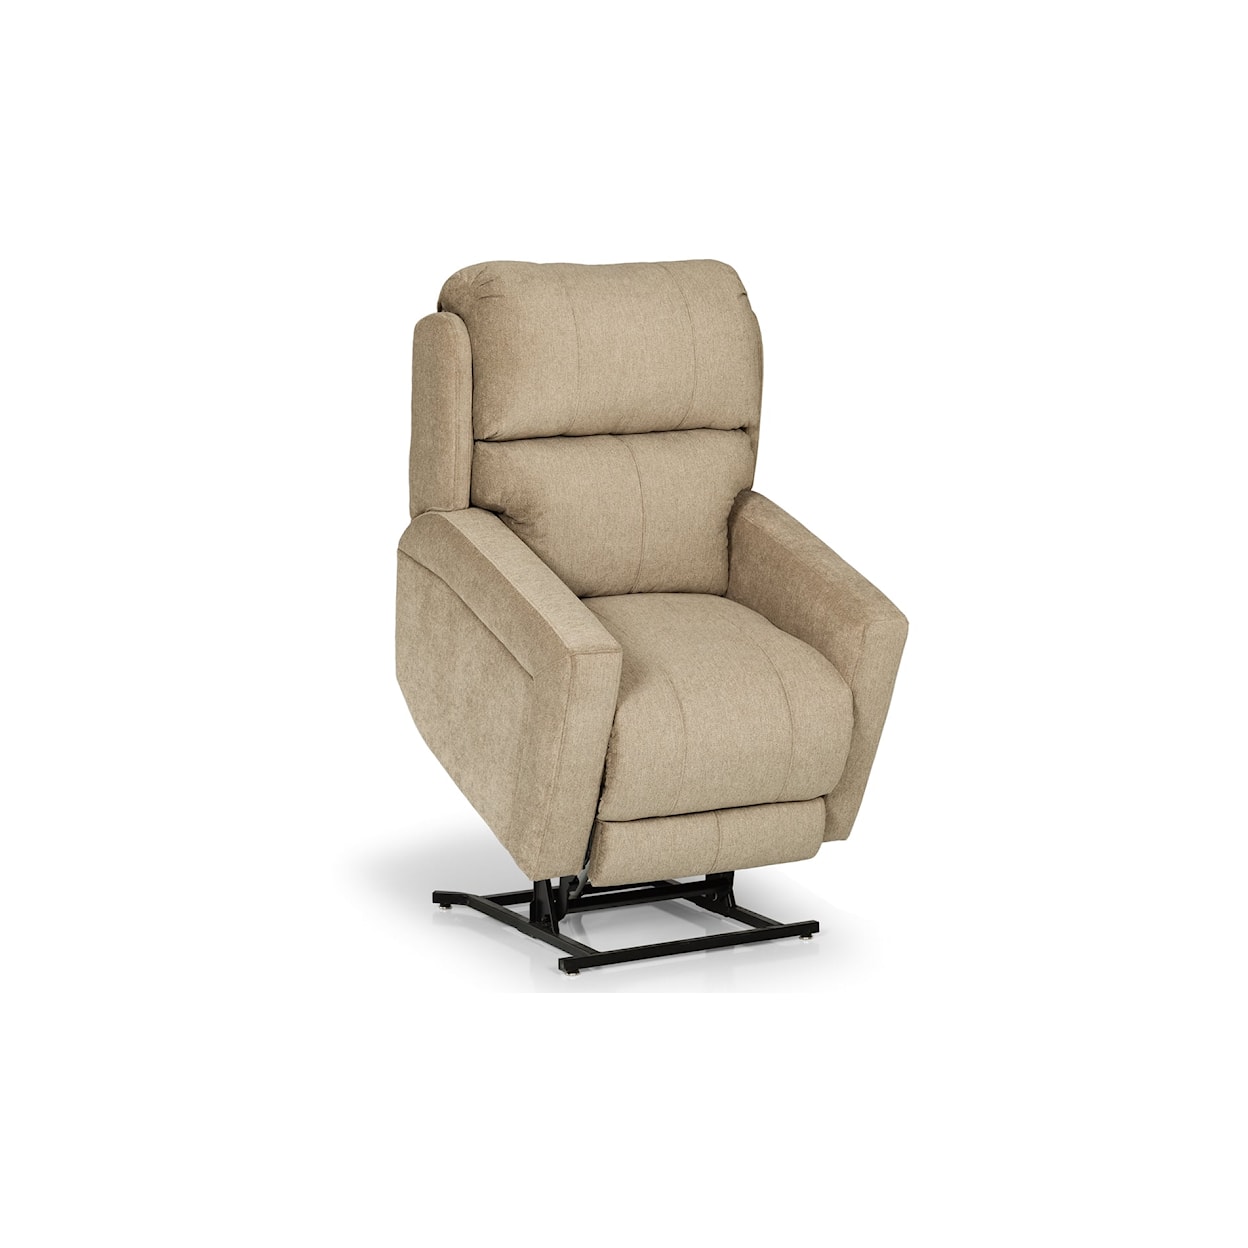 Sunset Home 898 Power Lift Chair with Power Headrest